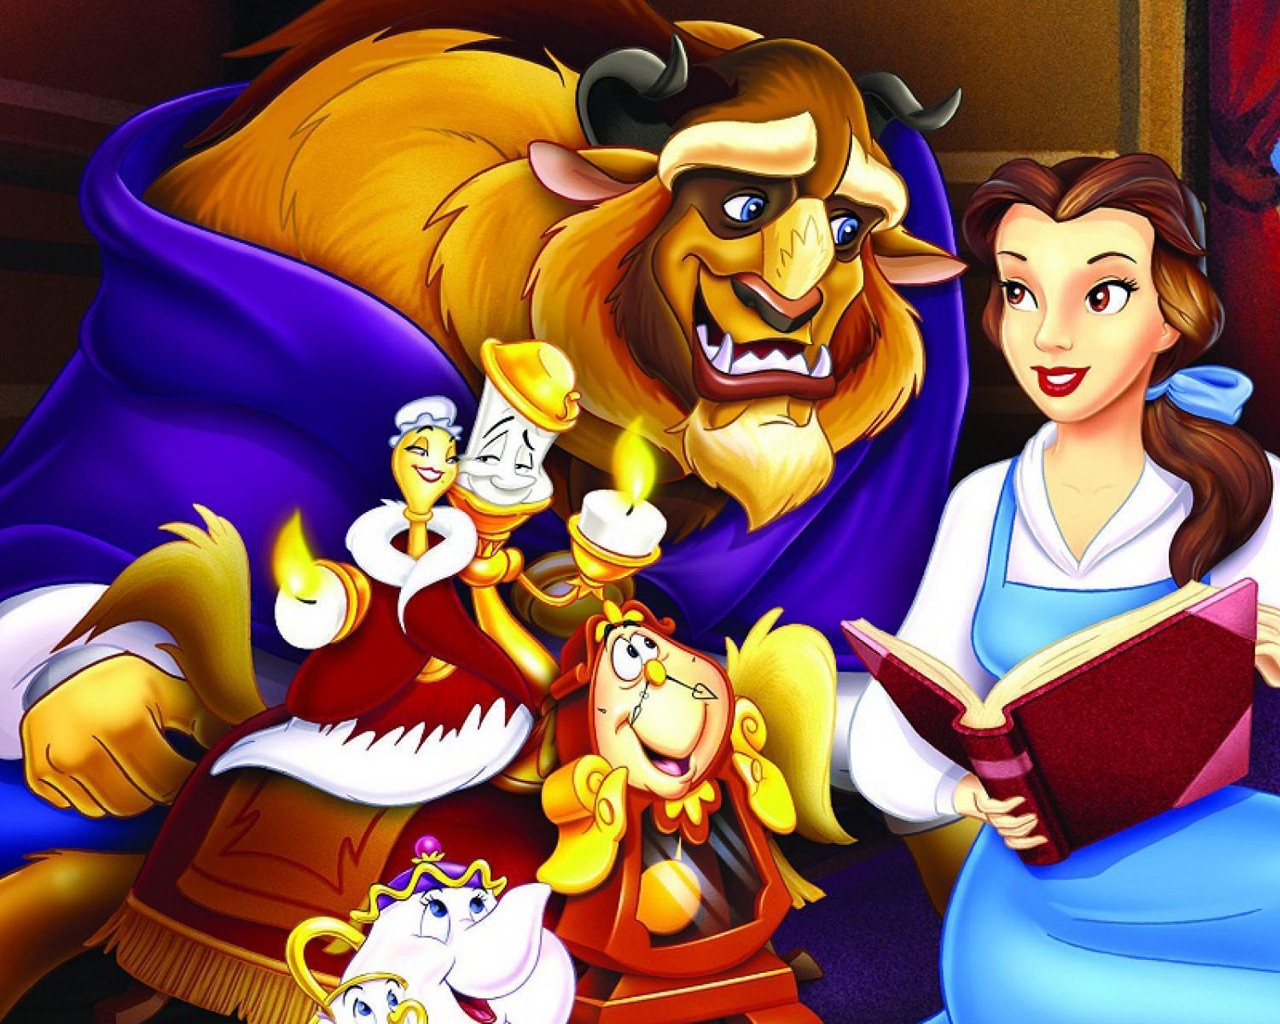 Beauty and the Beast for 1280 x 1024 resolution